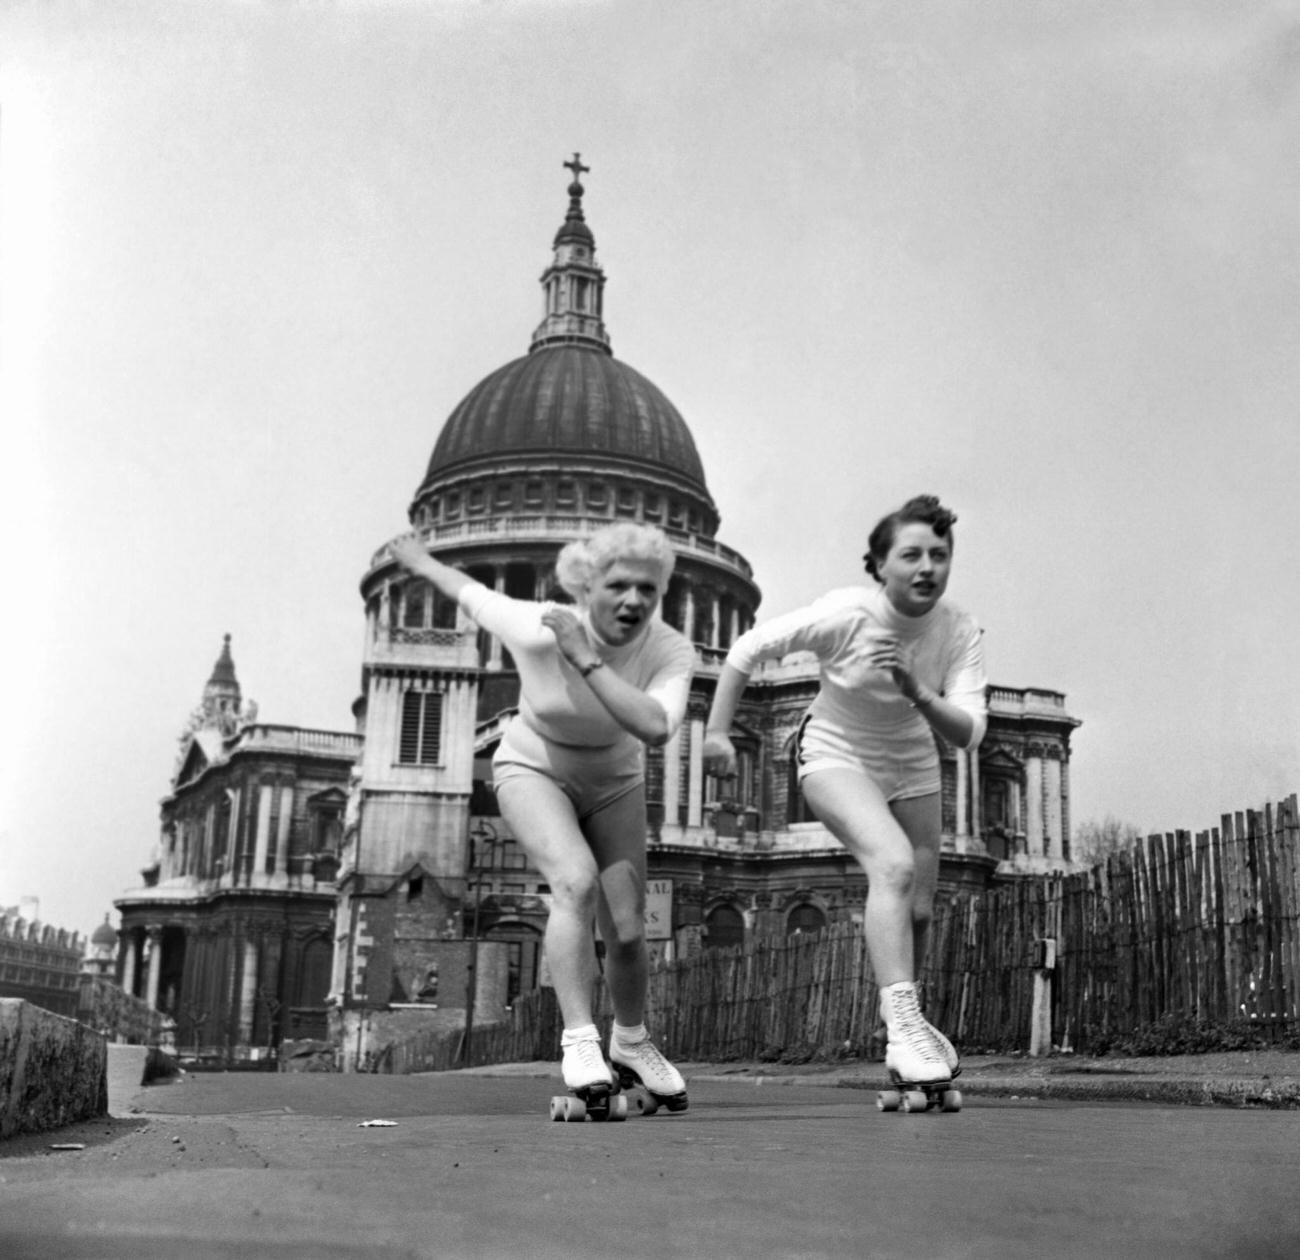 Patricia Barnett and Giselle Detrey Roller Skate to Work by St. Paul's Cathedral, 1953